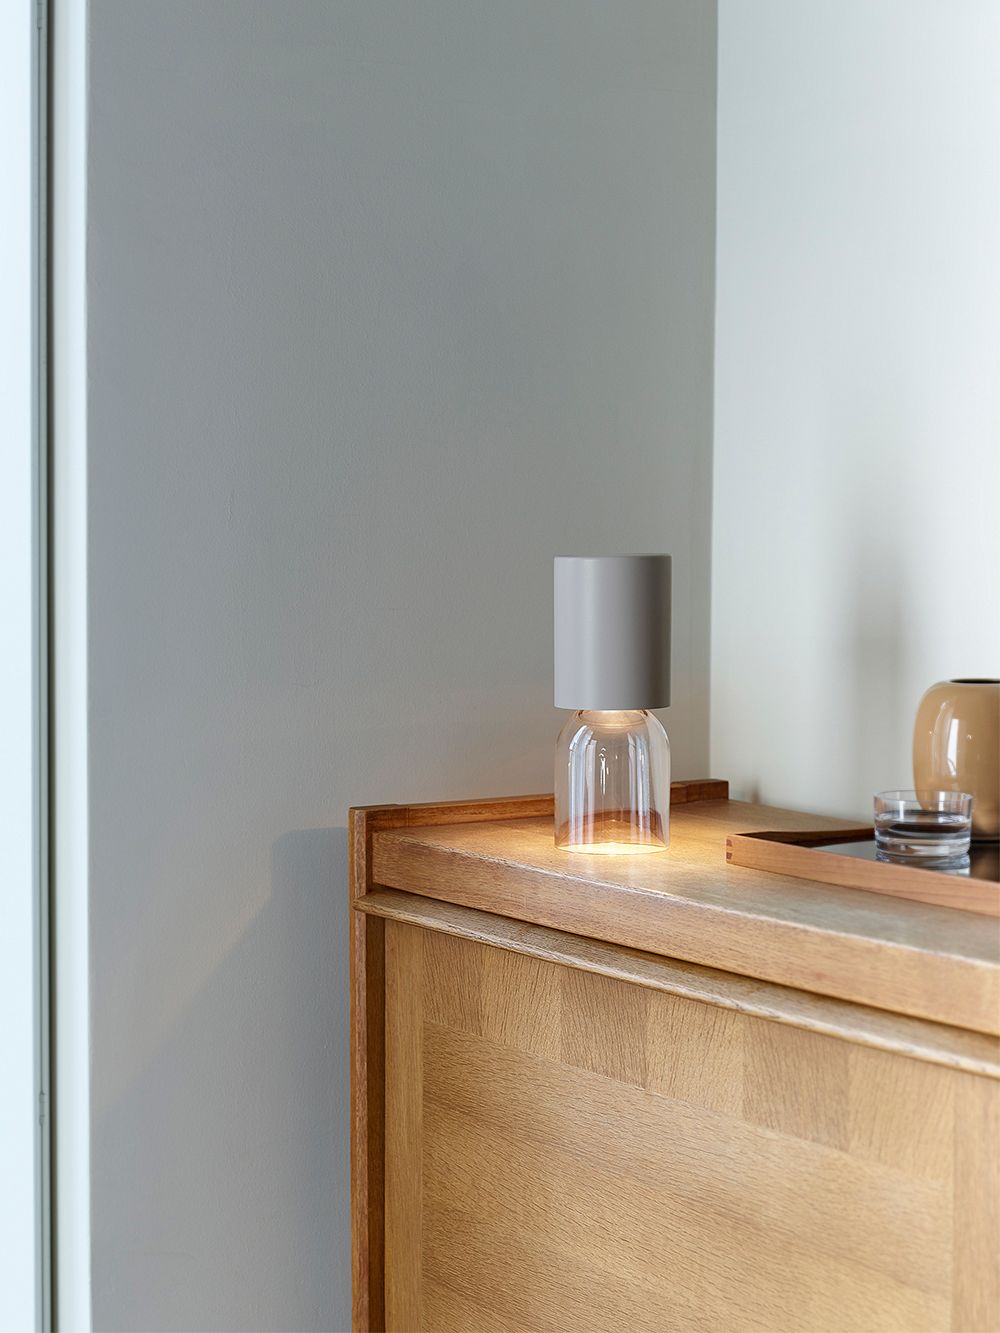 An image with Luceplan's Nut Mini table lamp on a sideboard, as part of the living room decor.